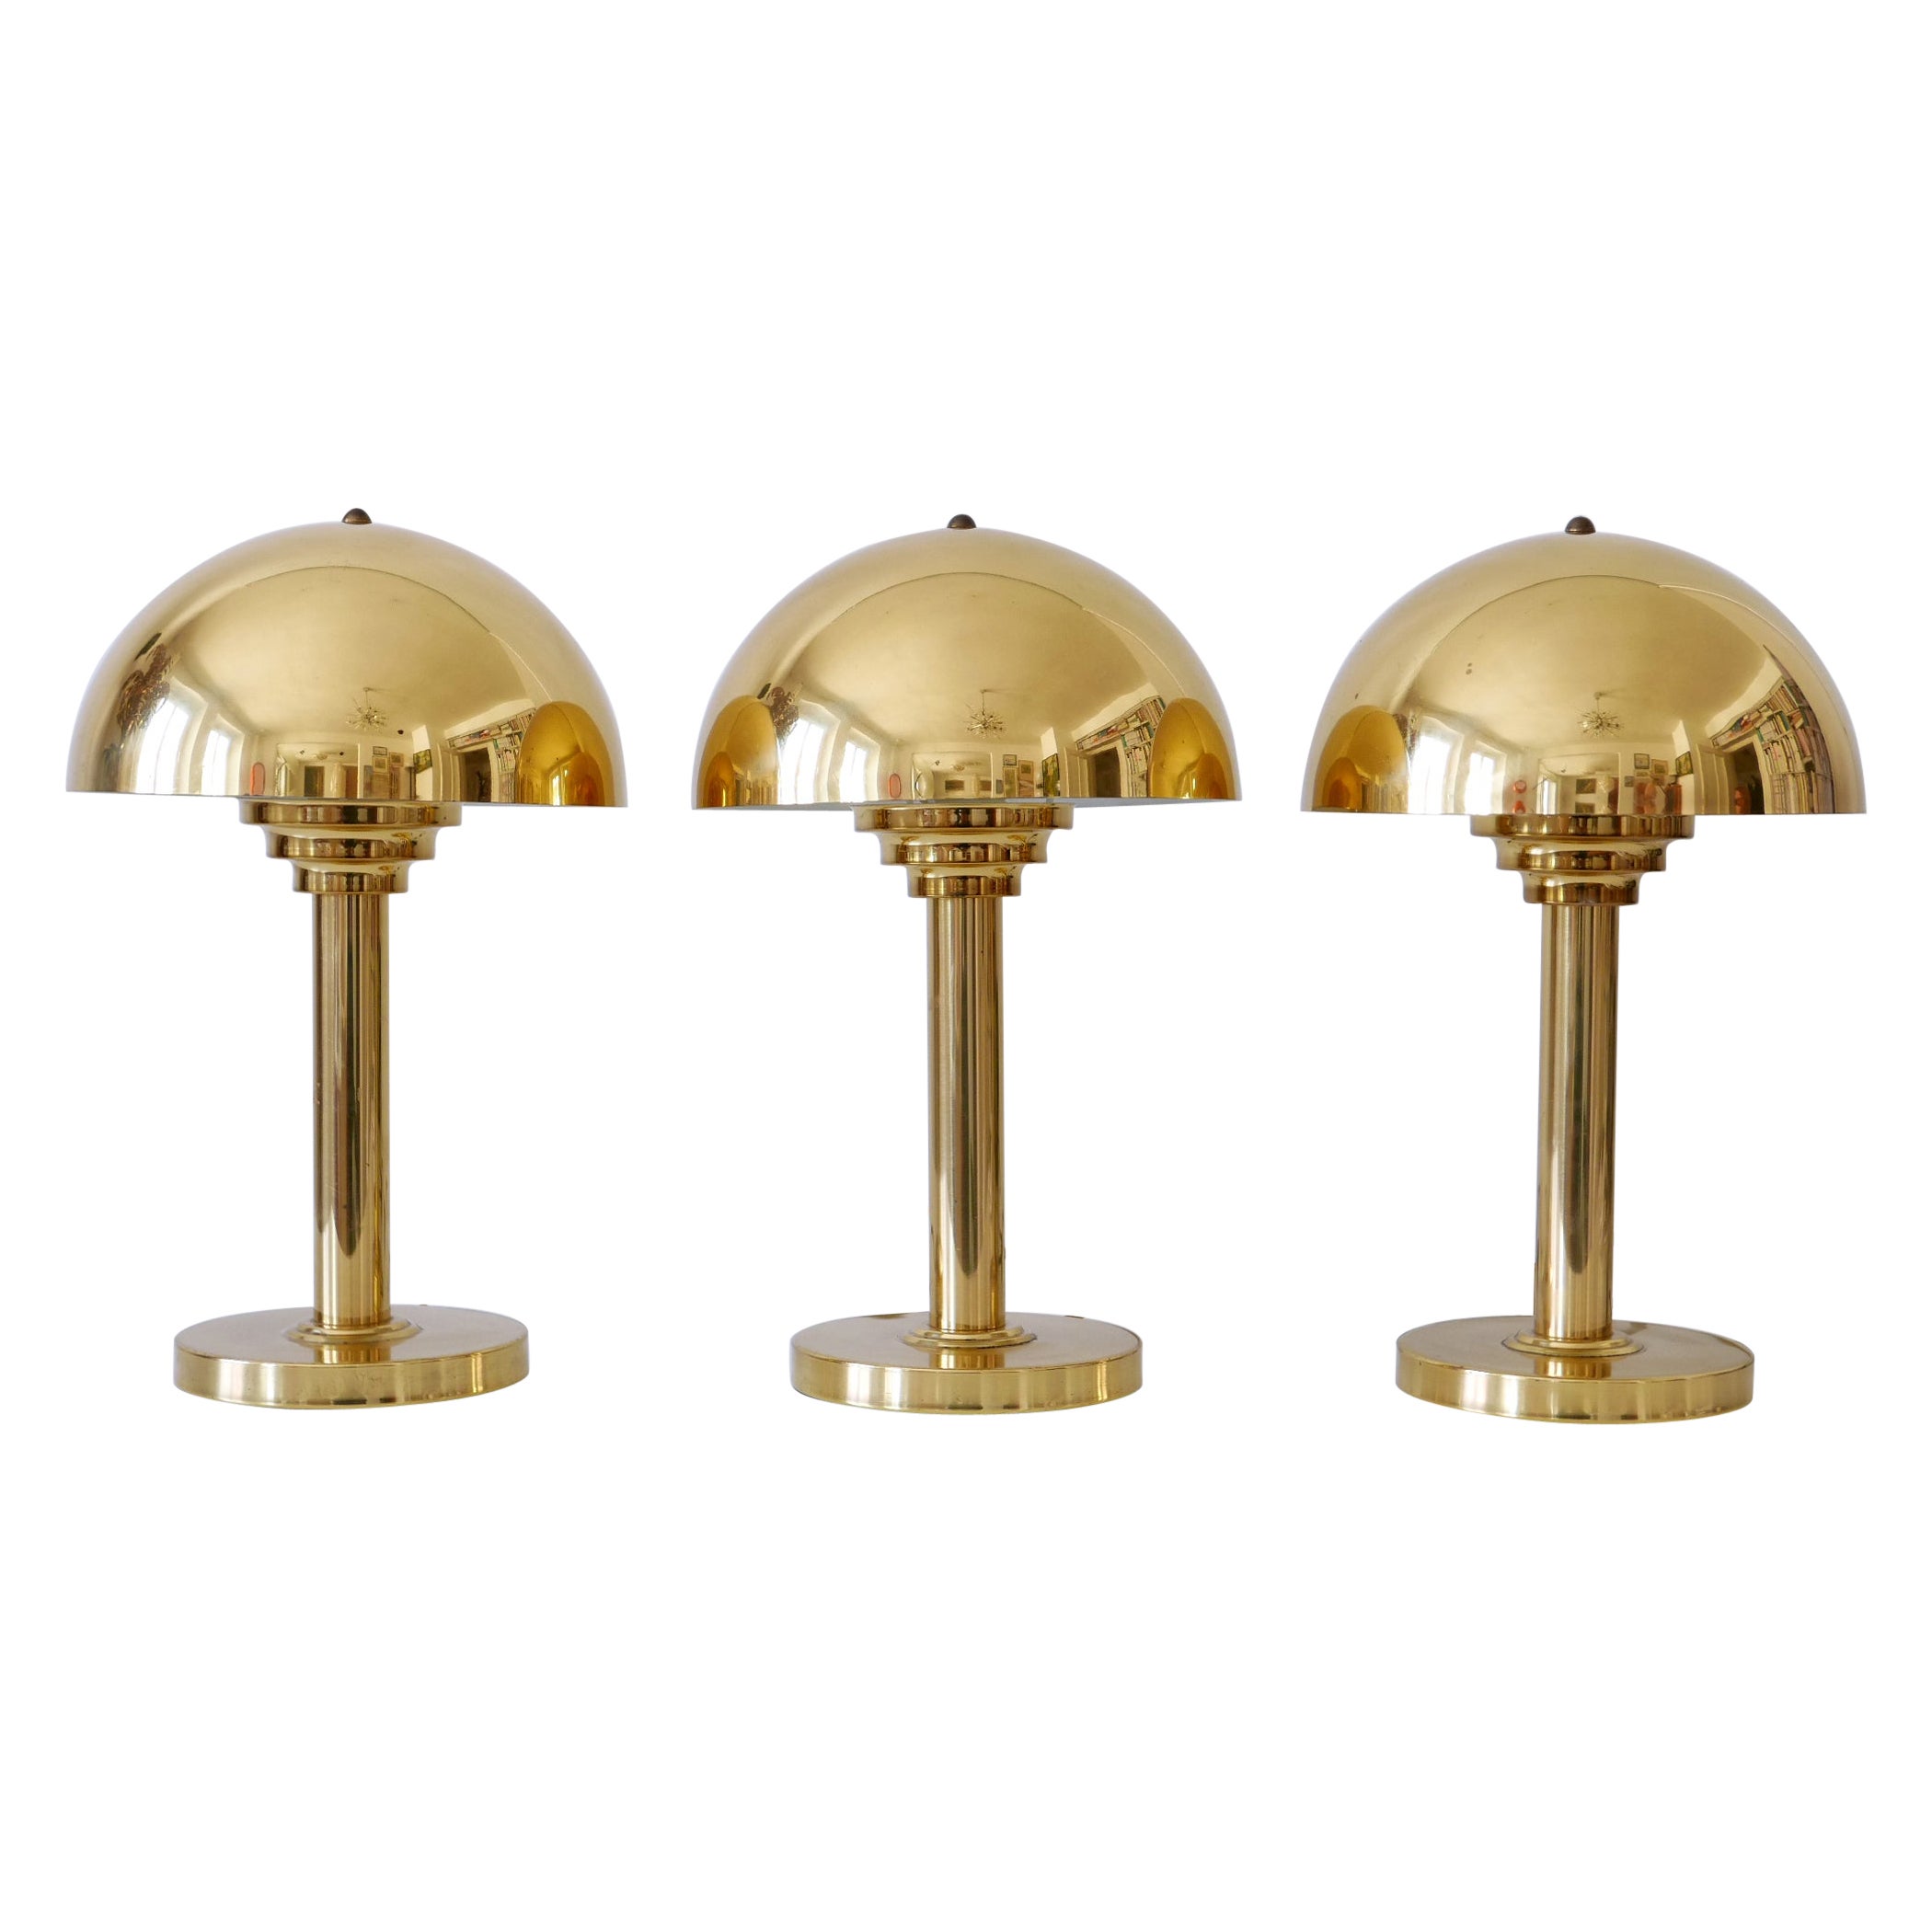 Elegant Mid-Century Modern Brass Table Lamps by WSB, Germany, 1960s